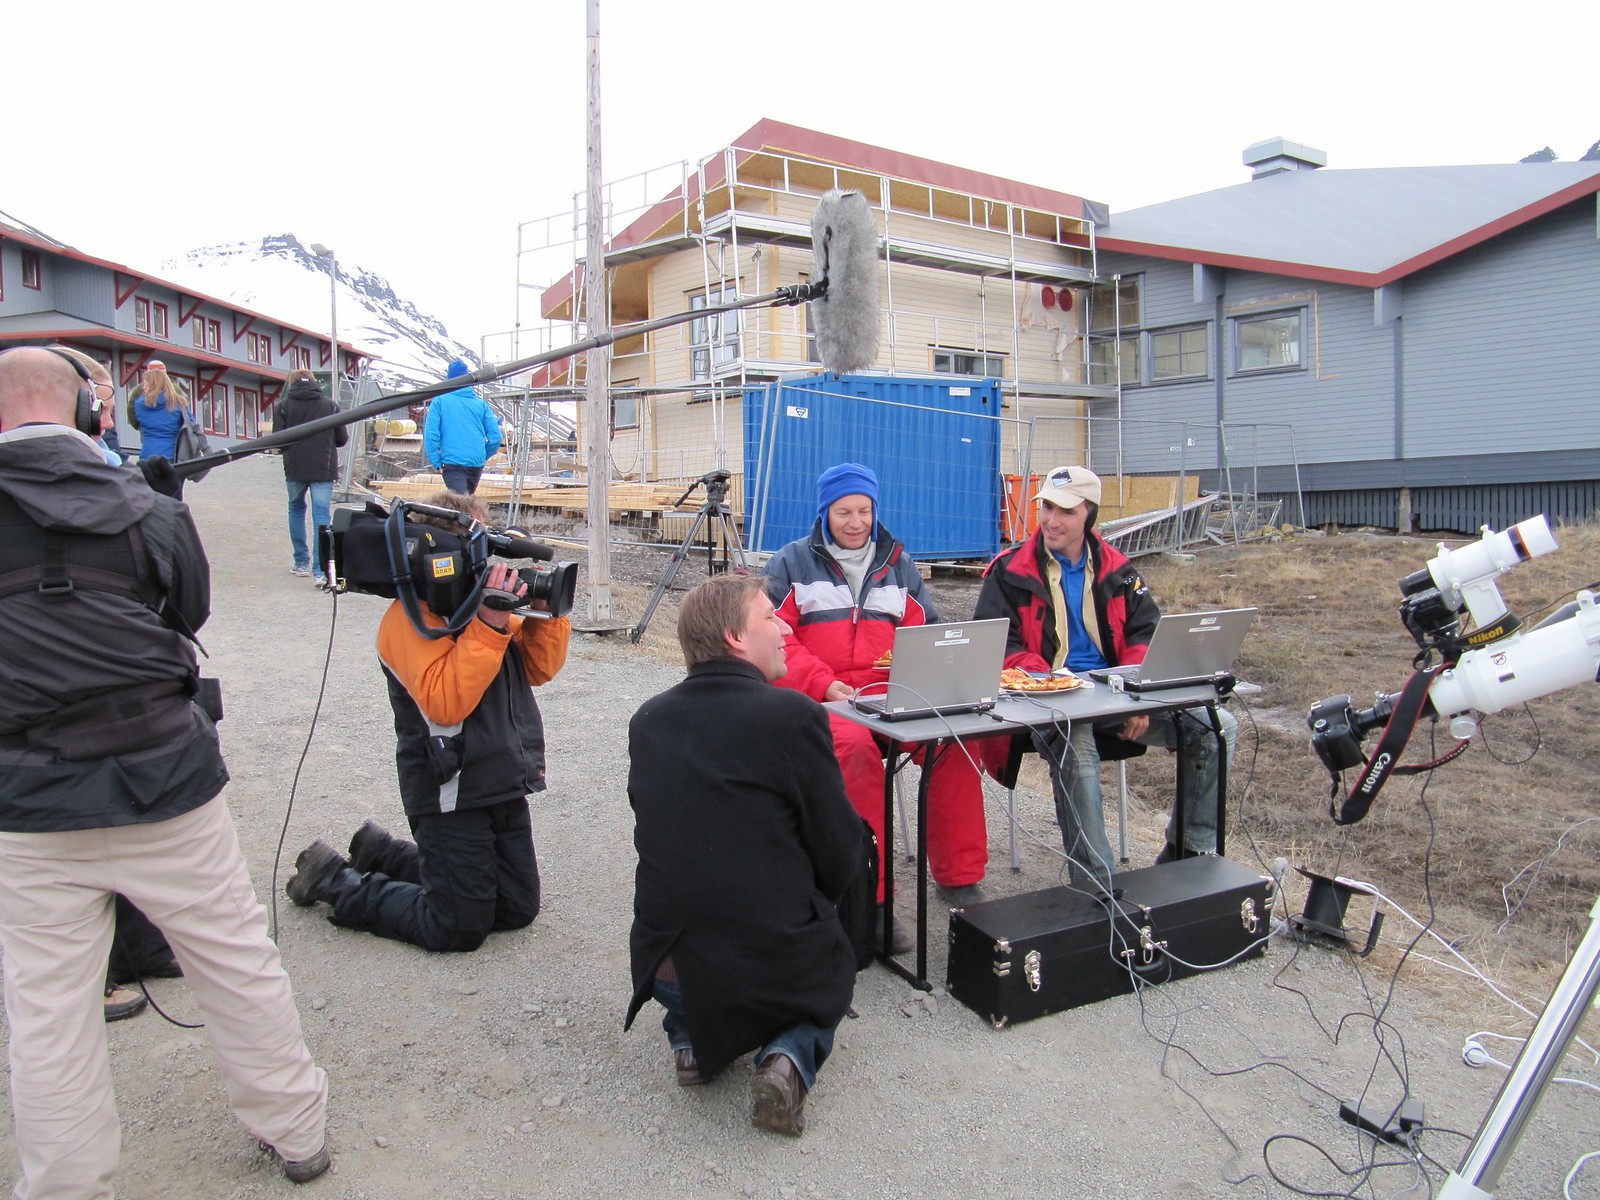 Svalbard. BBC interviews (while eating pizza)